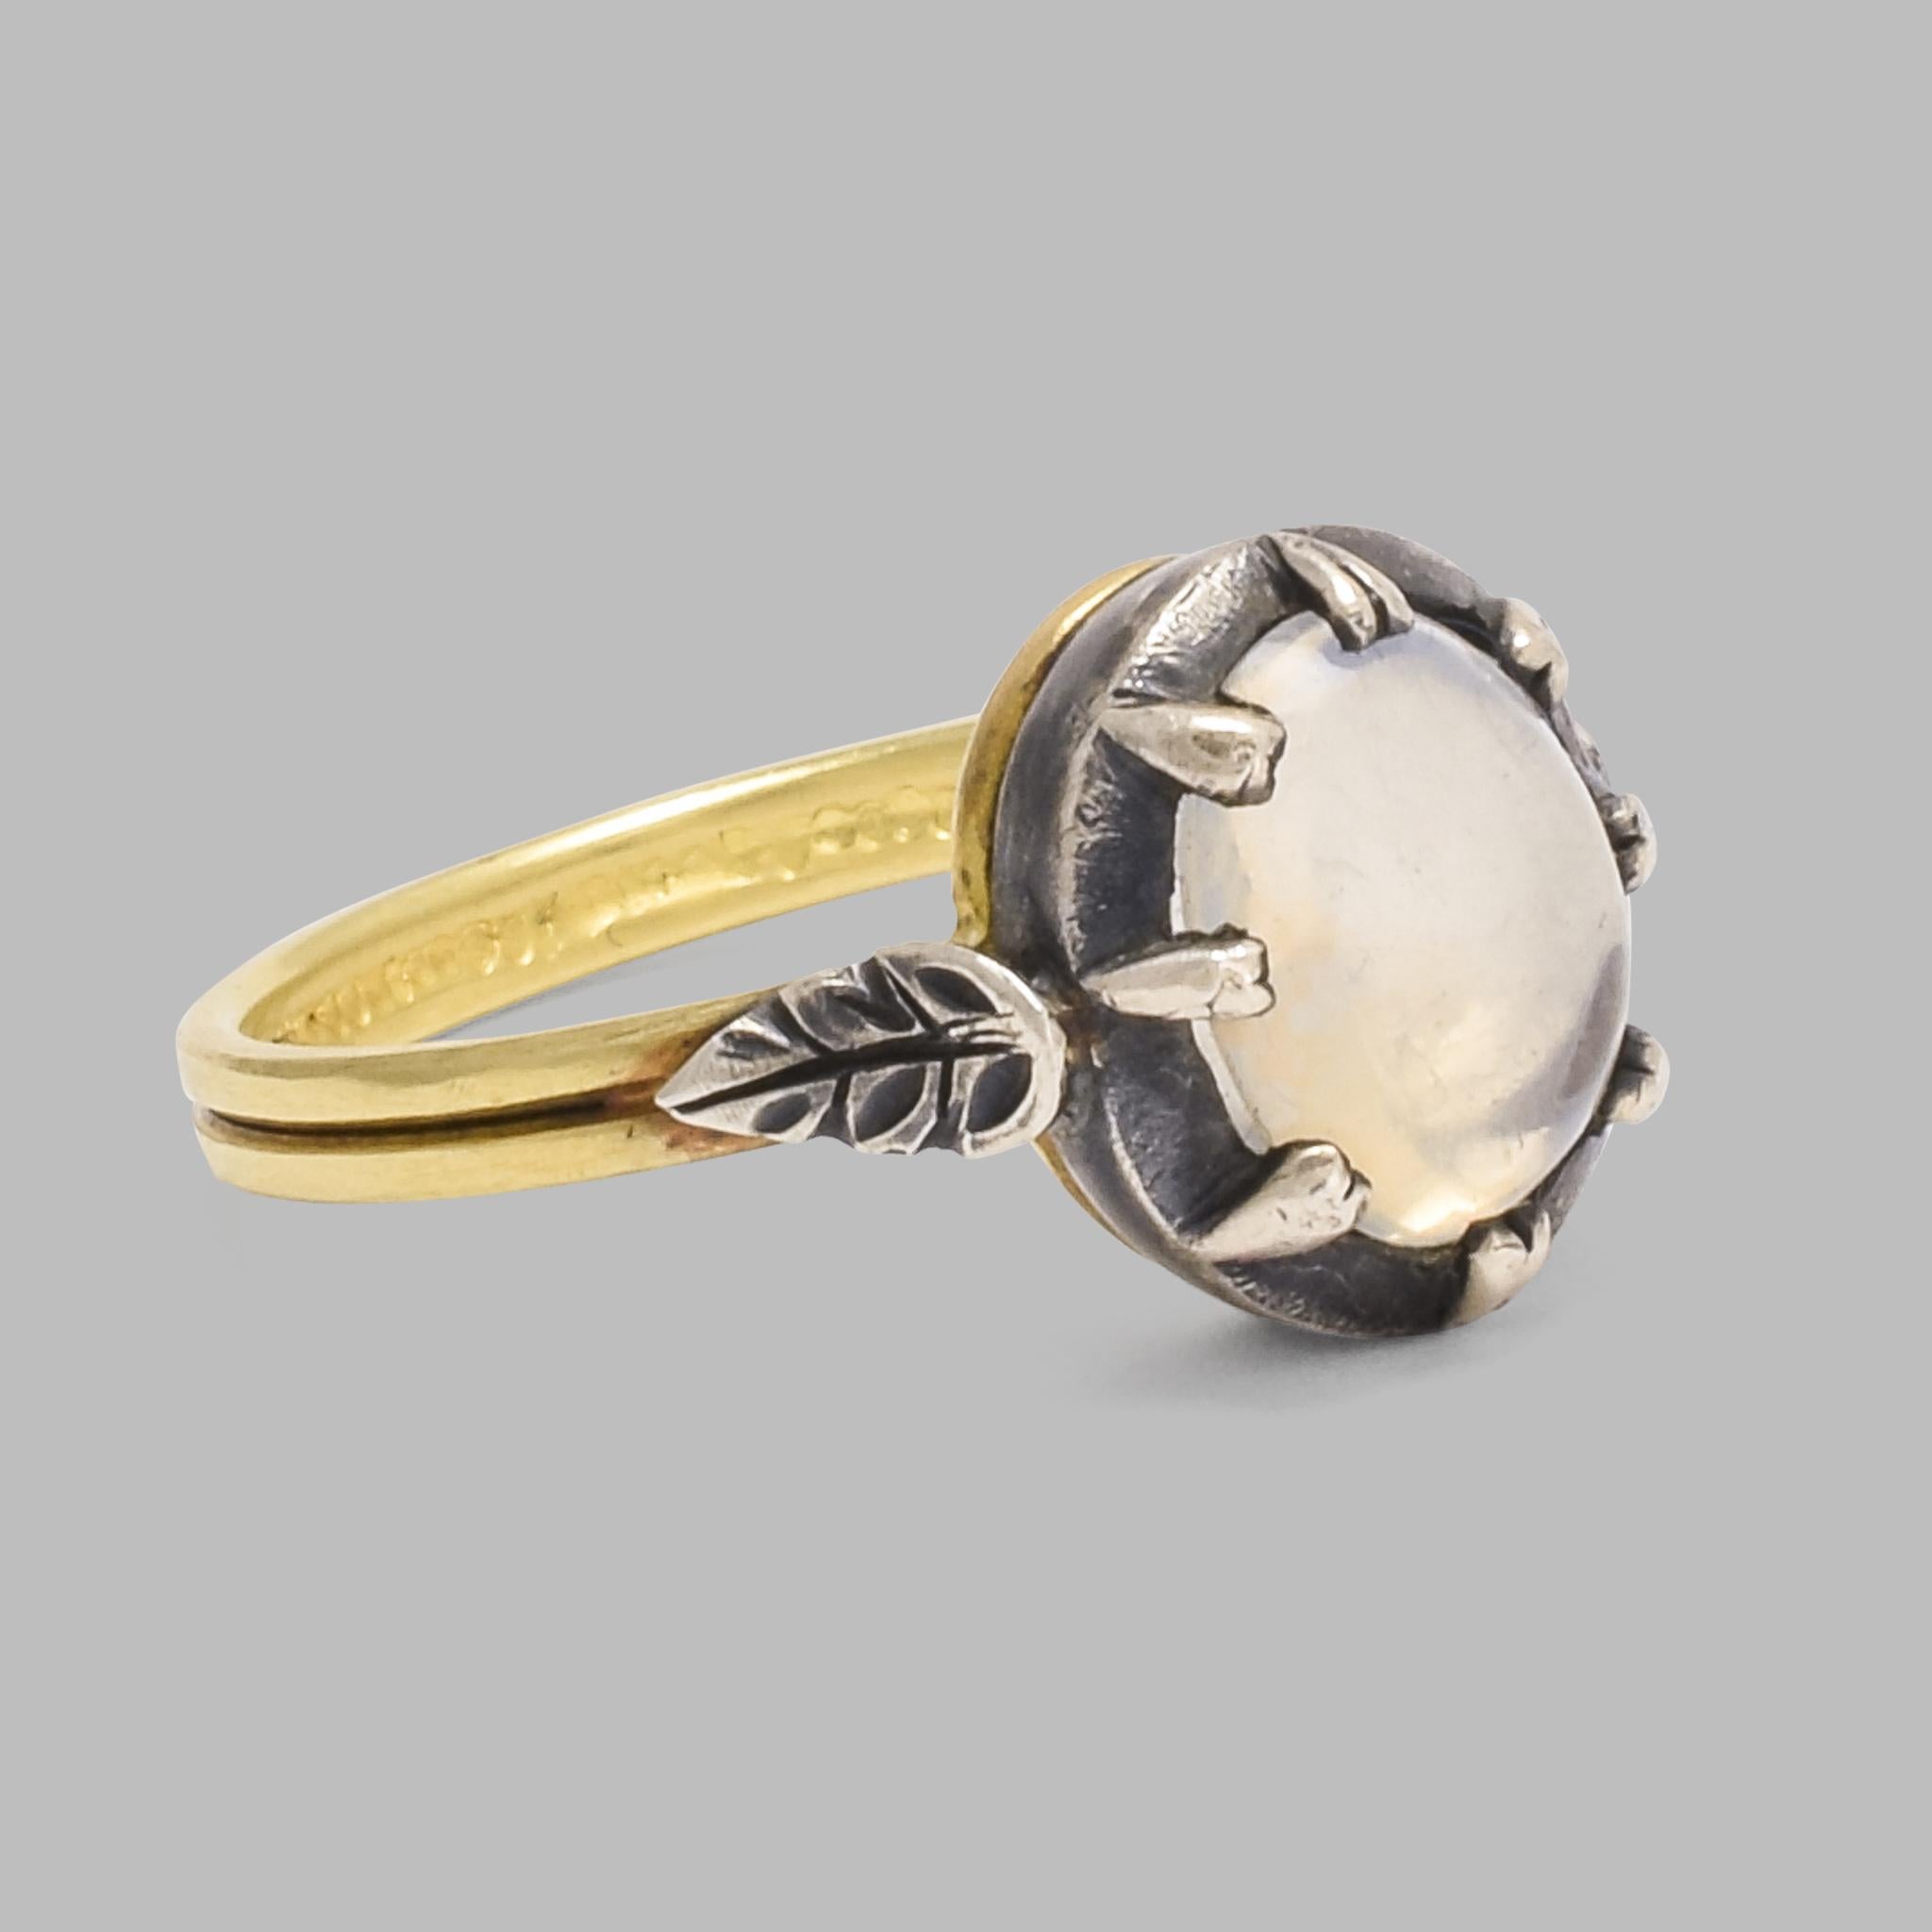 BL Bespoke Collection

Peace and Healing. White moonstone channels all the ethereal power of the Moon. Soothing energy gently radiates from within stone; as if by divine magic it shimmers as the light moves across its surface.

This ring has been